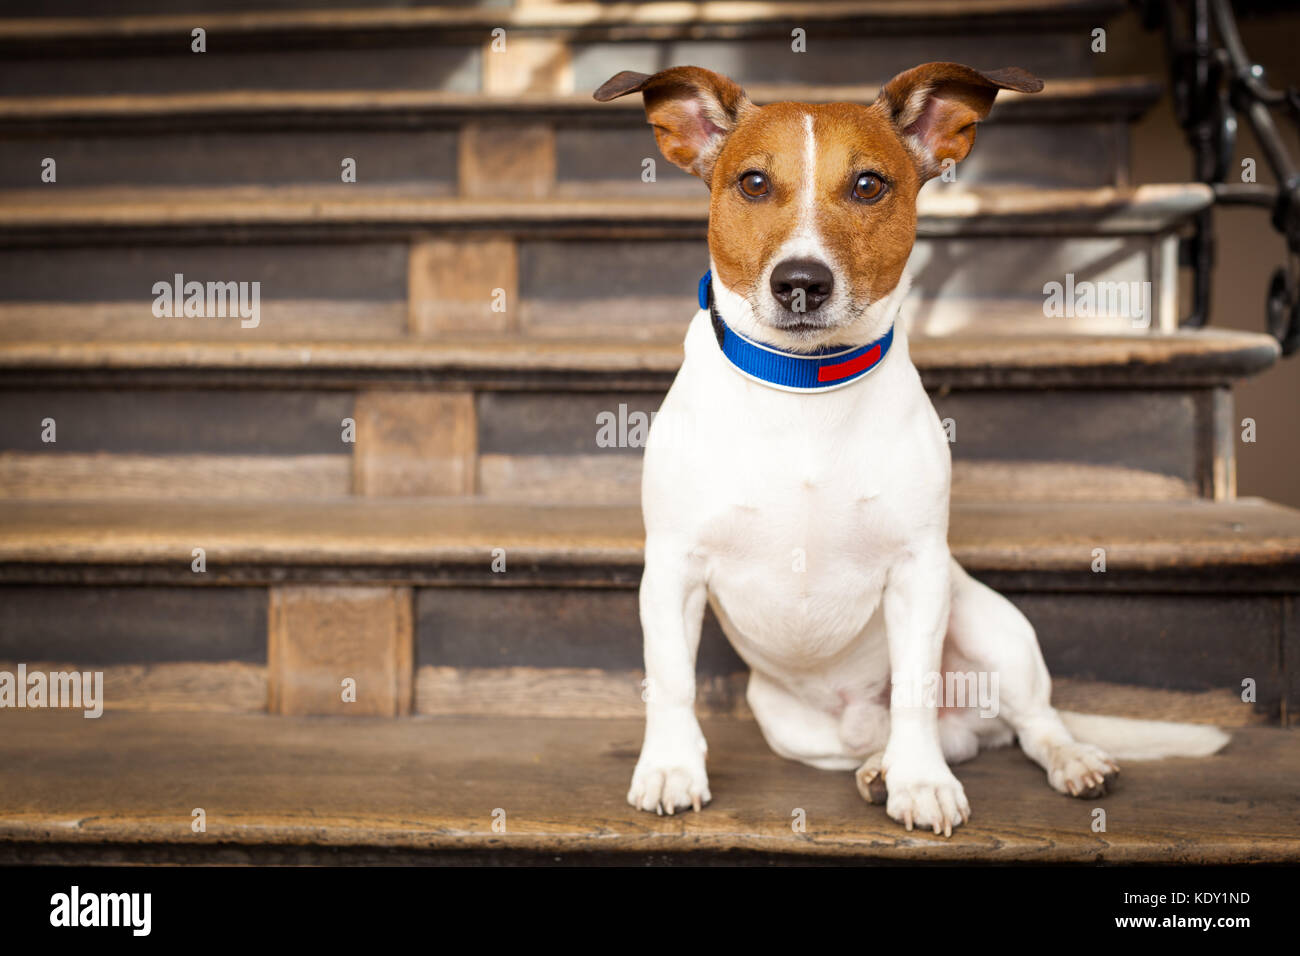 Jack Russell Terrier Dog Left Alone Outside Home On The Stairs Ready For A Walk With Owner Stock Photo Alamy